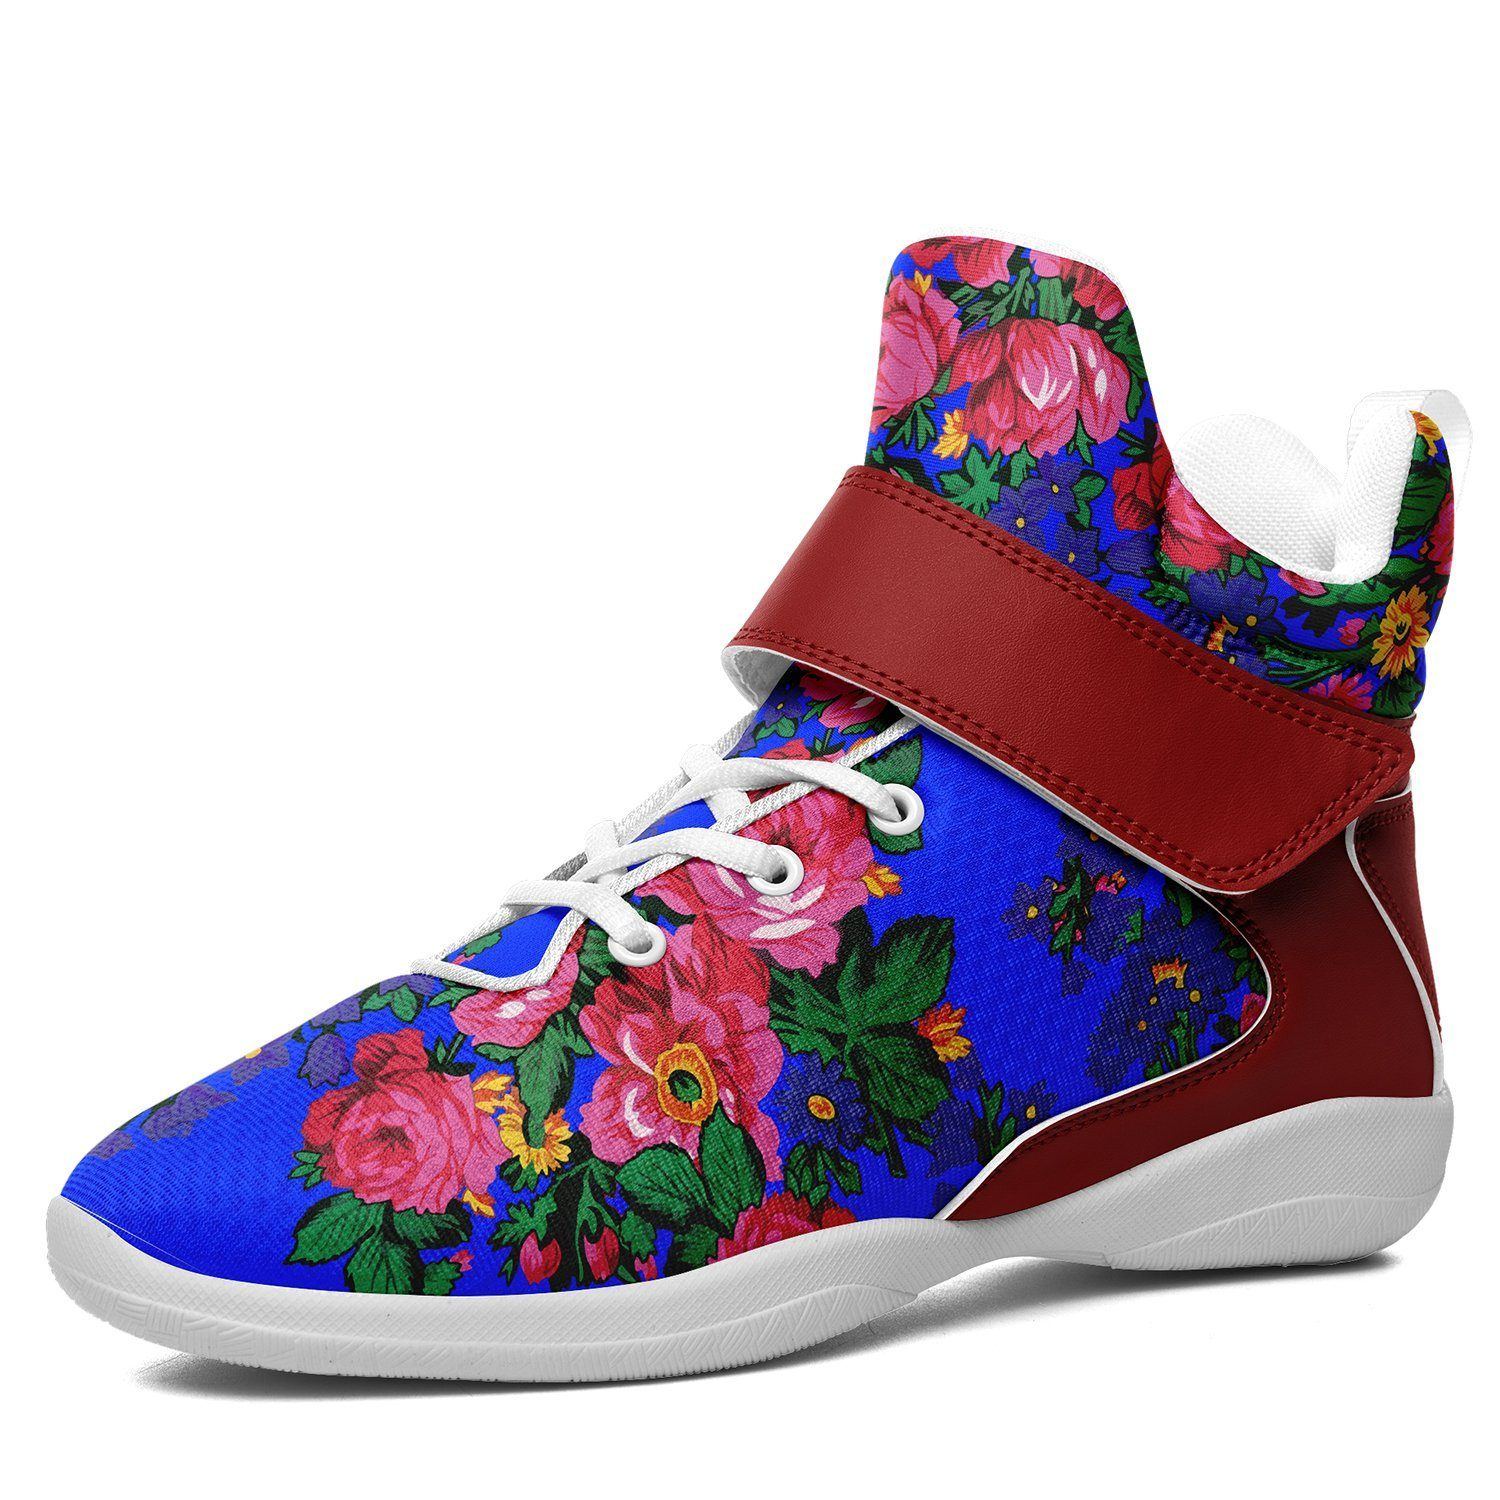 Kokum's Revenge Royal Kid's Ipottaa Basketball / Sport High Top Shoes 49 Dzine US Women 4.5 / US Youth 3.5 / EUR 35 White Sole with Dark Red Strap 